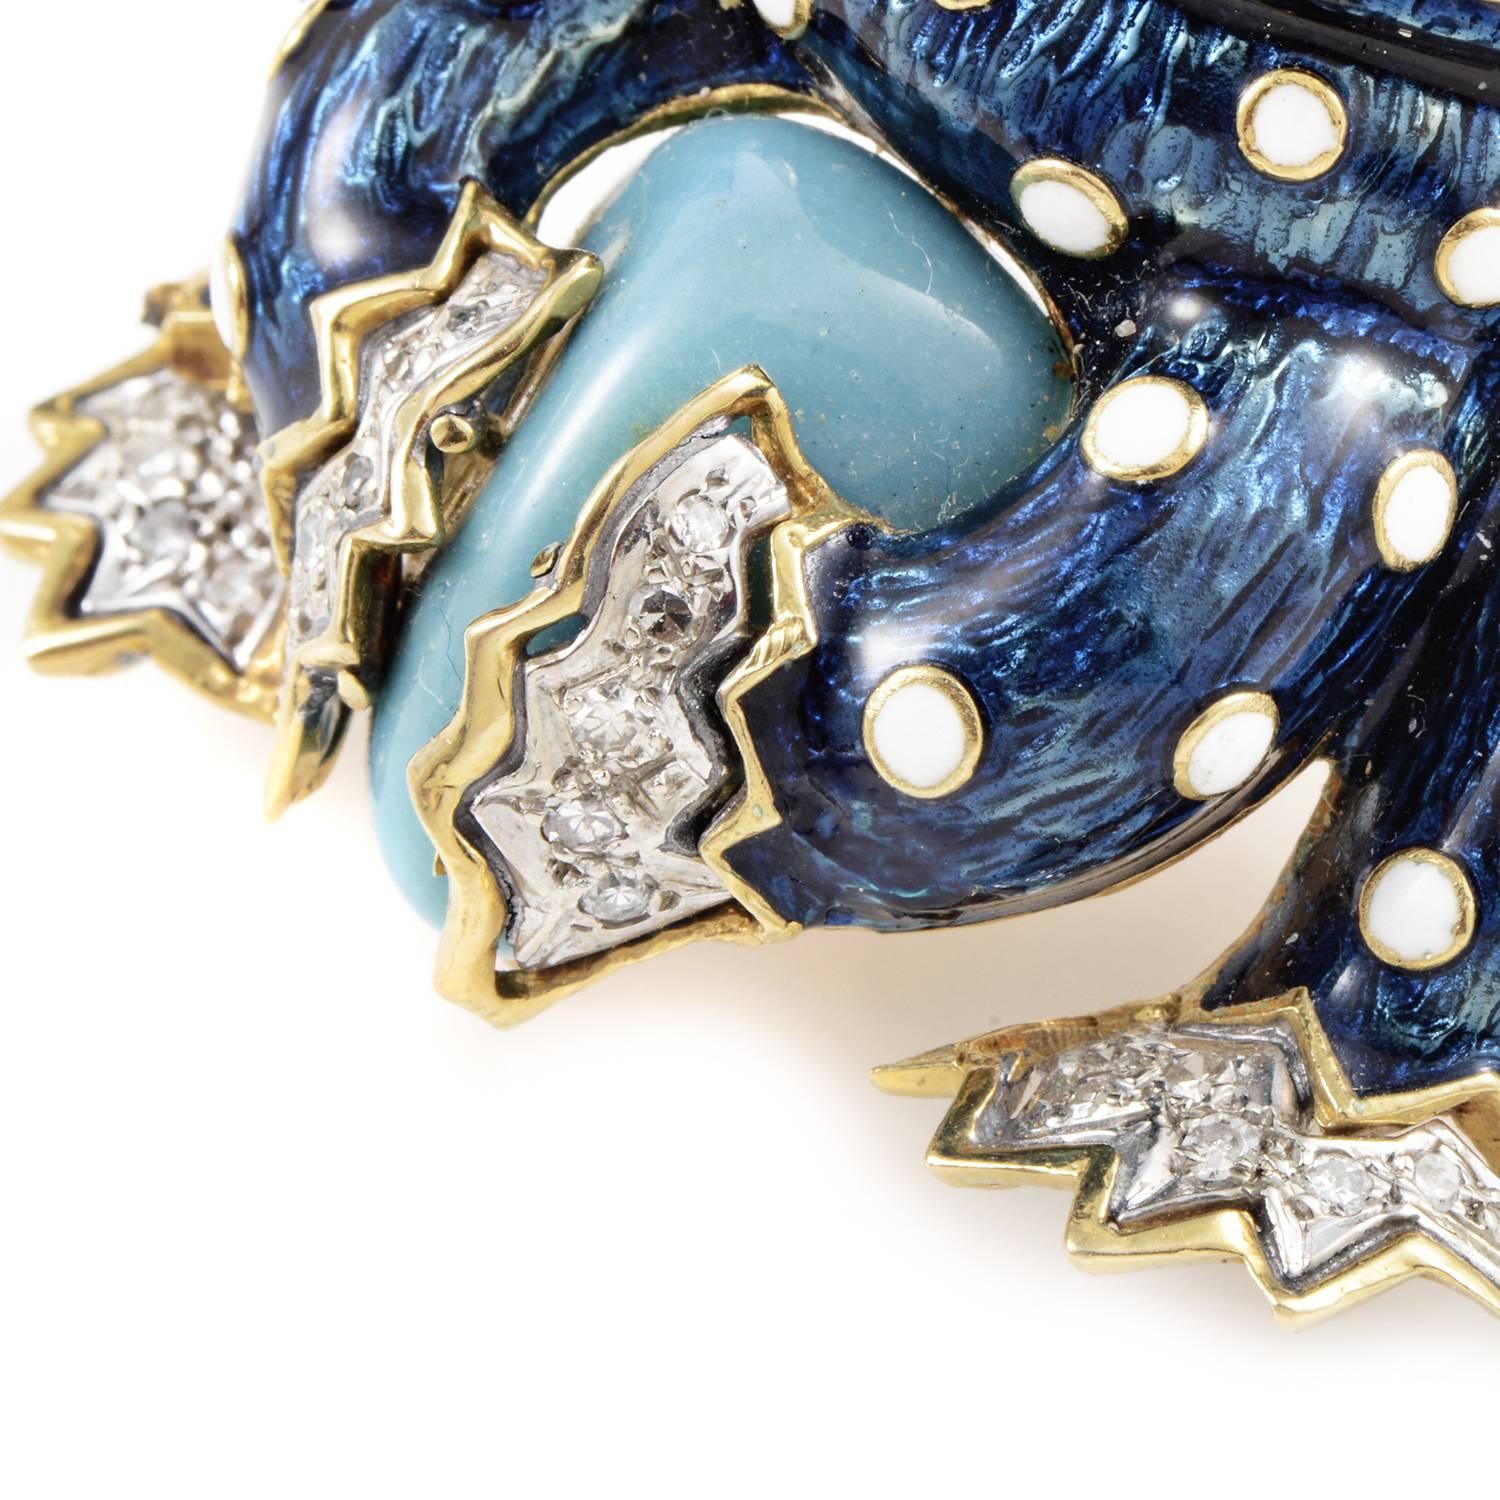 Amphibious nature takes on luxurious charm with this beautiful frog brooch. A speckled coat of rich blue enamel encompasses the frog's body. Threads of 18K Yellow Gold frame flourishes of 18K White Gold under 0.50ct diamonds, while the eyes shine